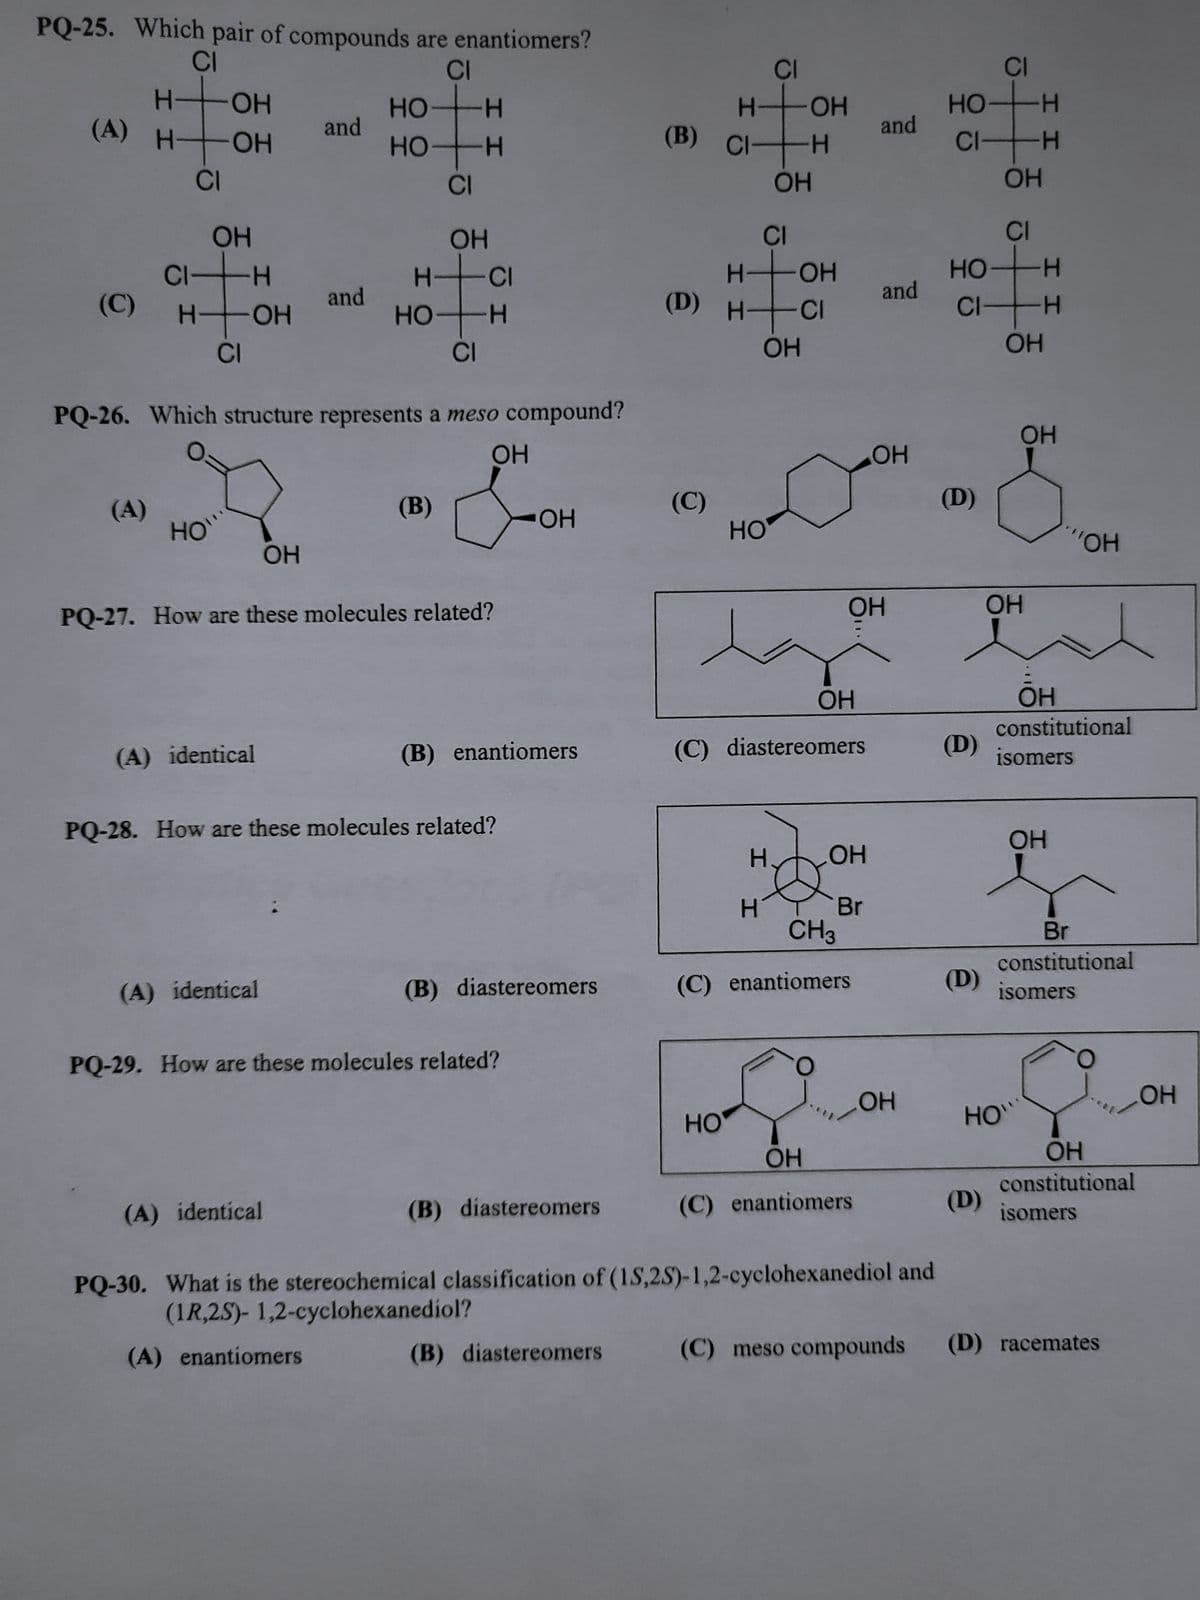 PQ-25. Which pair of compounds are enantiomers?
CI
H- ОН
ОН
(A) H
H
(A)
CI
OH
CI- н
(C) н+он
то
CI
HO`
(A) identical
and
ОН
(A) identical
and
CI
HO-H
HO
(A) identical
PQ-26. Which structure represents a meso compound?
ОН
CI
ОН
HCI
НО-
н
но
(В)
PQ-27. How are these molecules related?
-Н
PQ-28. How are these molecules related?
(B) enantiomers
ОН
PQ-29. How are these molecules related?
(B) diastereomers
(B) diastereomers
(B) diastereomers
(B) CI
CI
H-OH
-Н
(C)
(D) н+а
ОН
CI
Н ОН
НО
ОН
HO
(C) diastereomers
Н.
Н
ОН
ОН
ОН
Br
CH3
(C) enantiomers
and
ОН
(C) enantiomers
and
ОН
ОН
PQ-30. What is the stereochemical classification of (1S,2S)-1,2-cyclohexanediol and
(1R,2S)- 1,2-cyclohexanediol?
(A) enantiomers
(D)
HO
CI-H
(D)
CI
но
(D)
ОН
НО-
CI-H
ОН
(D)
CI
H
I I
ОН
HO"
ІІ
ОН
ОН
constitutional
isomers
ОН
"ОН
Br
constitutional
isomers
ОН
constitutional
isomers
(C) meso compounds (D) racemates
ОН